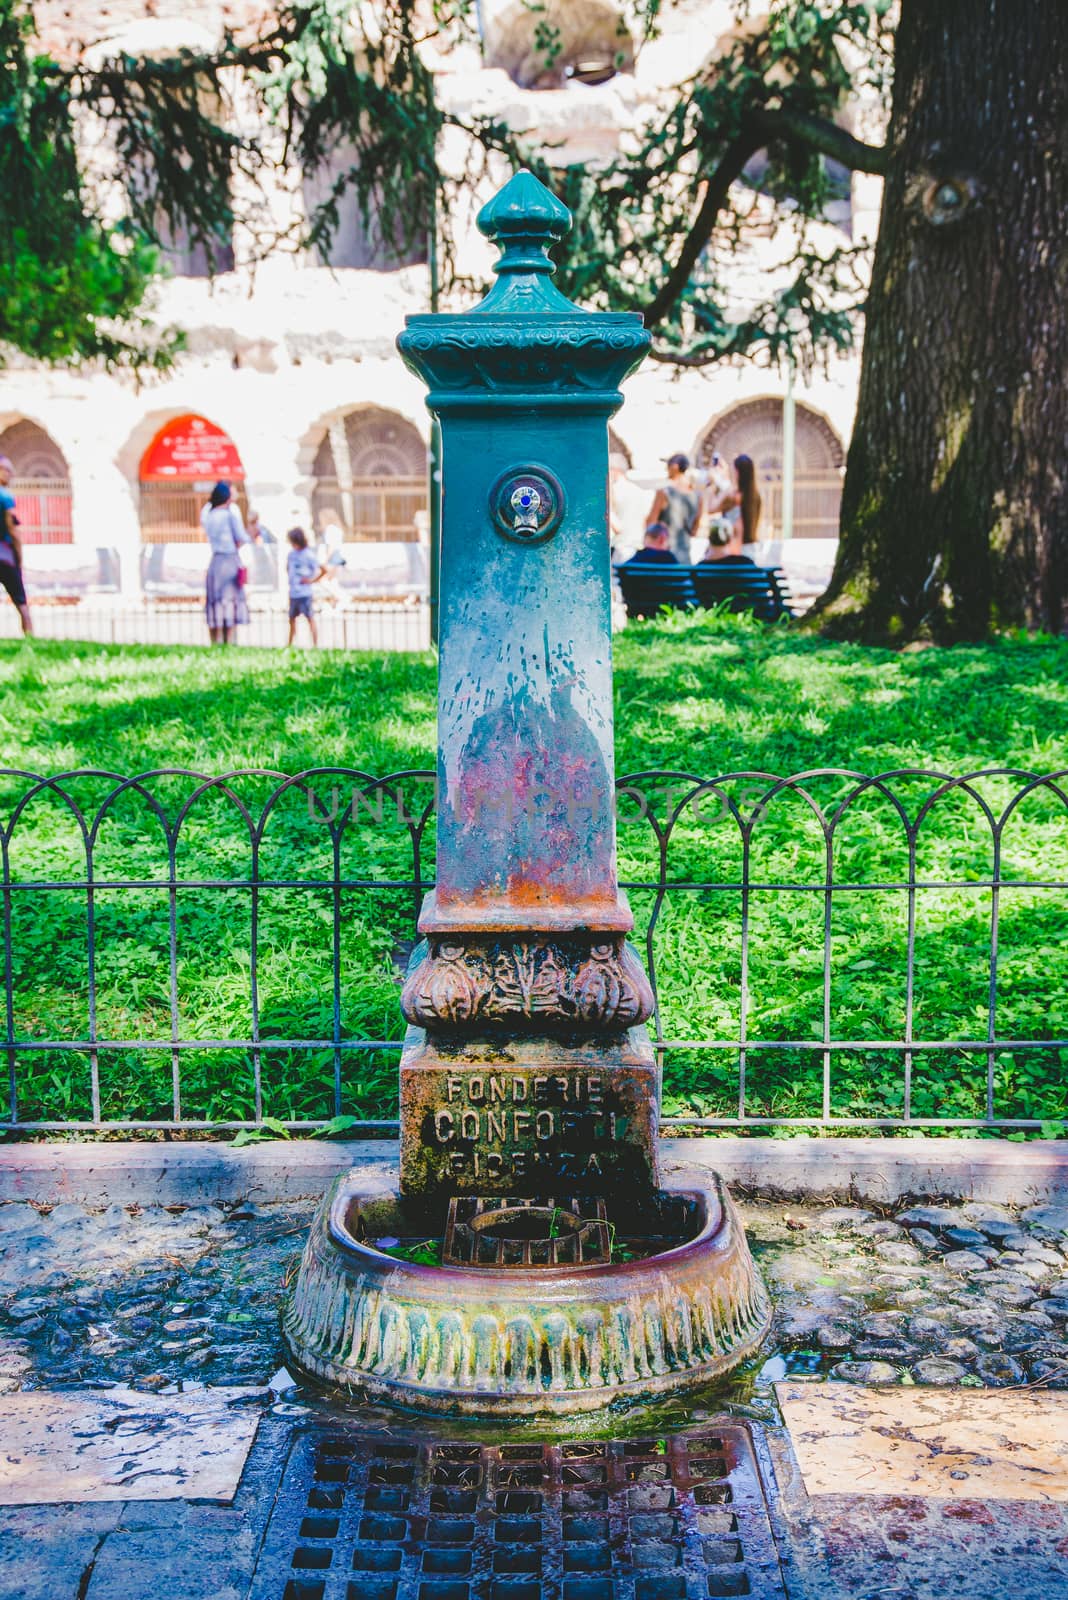 An old, nostalgic and antique drinking fountain in Verona, Italy. It is made of metal and already shows many traces of rust on the fountain and drain, but has a modern tap.